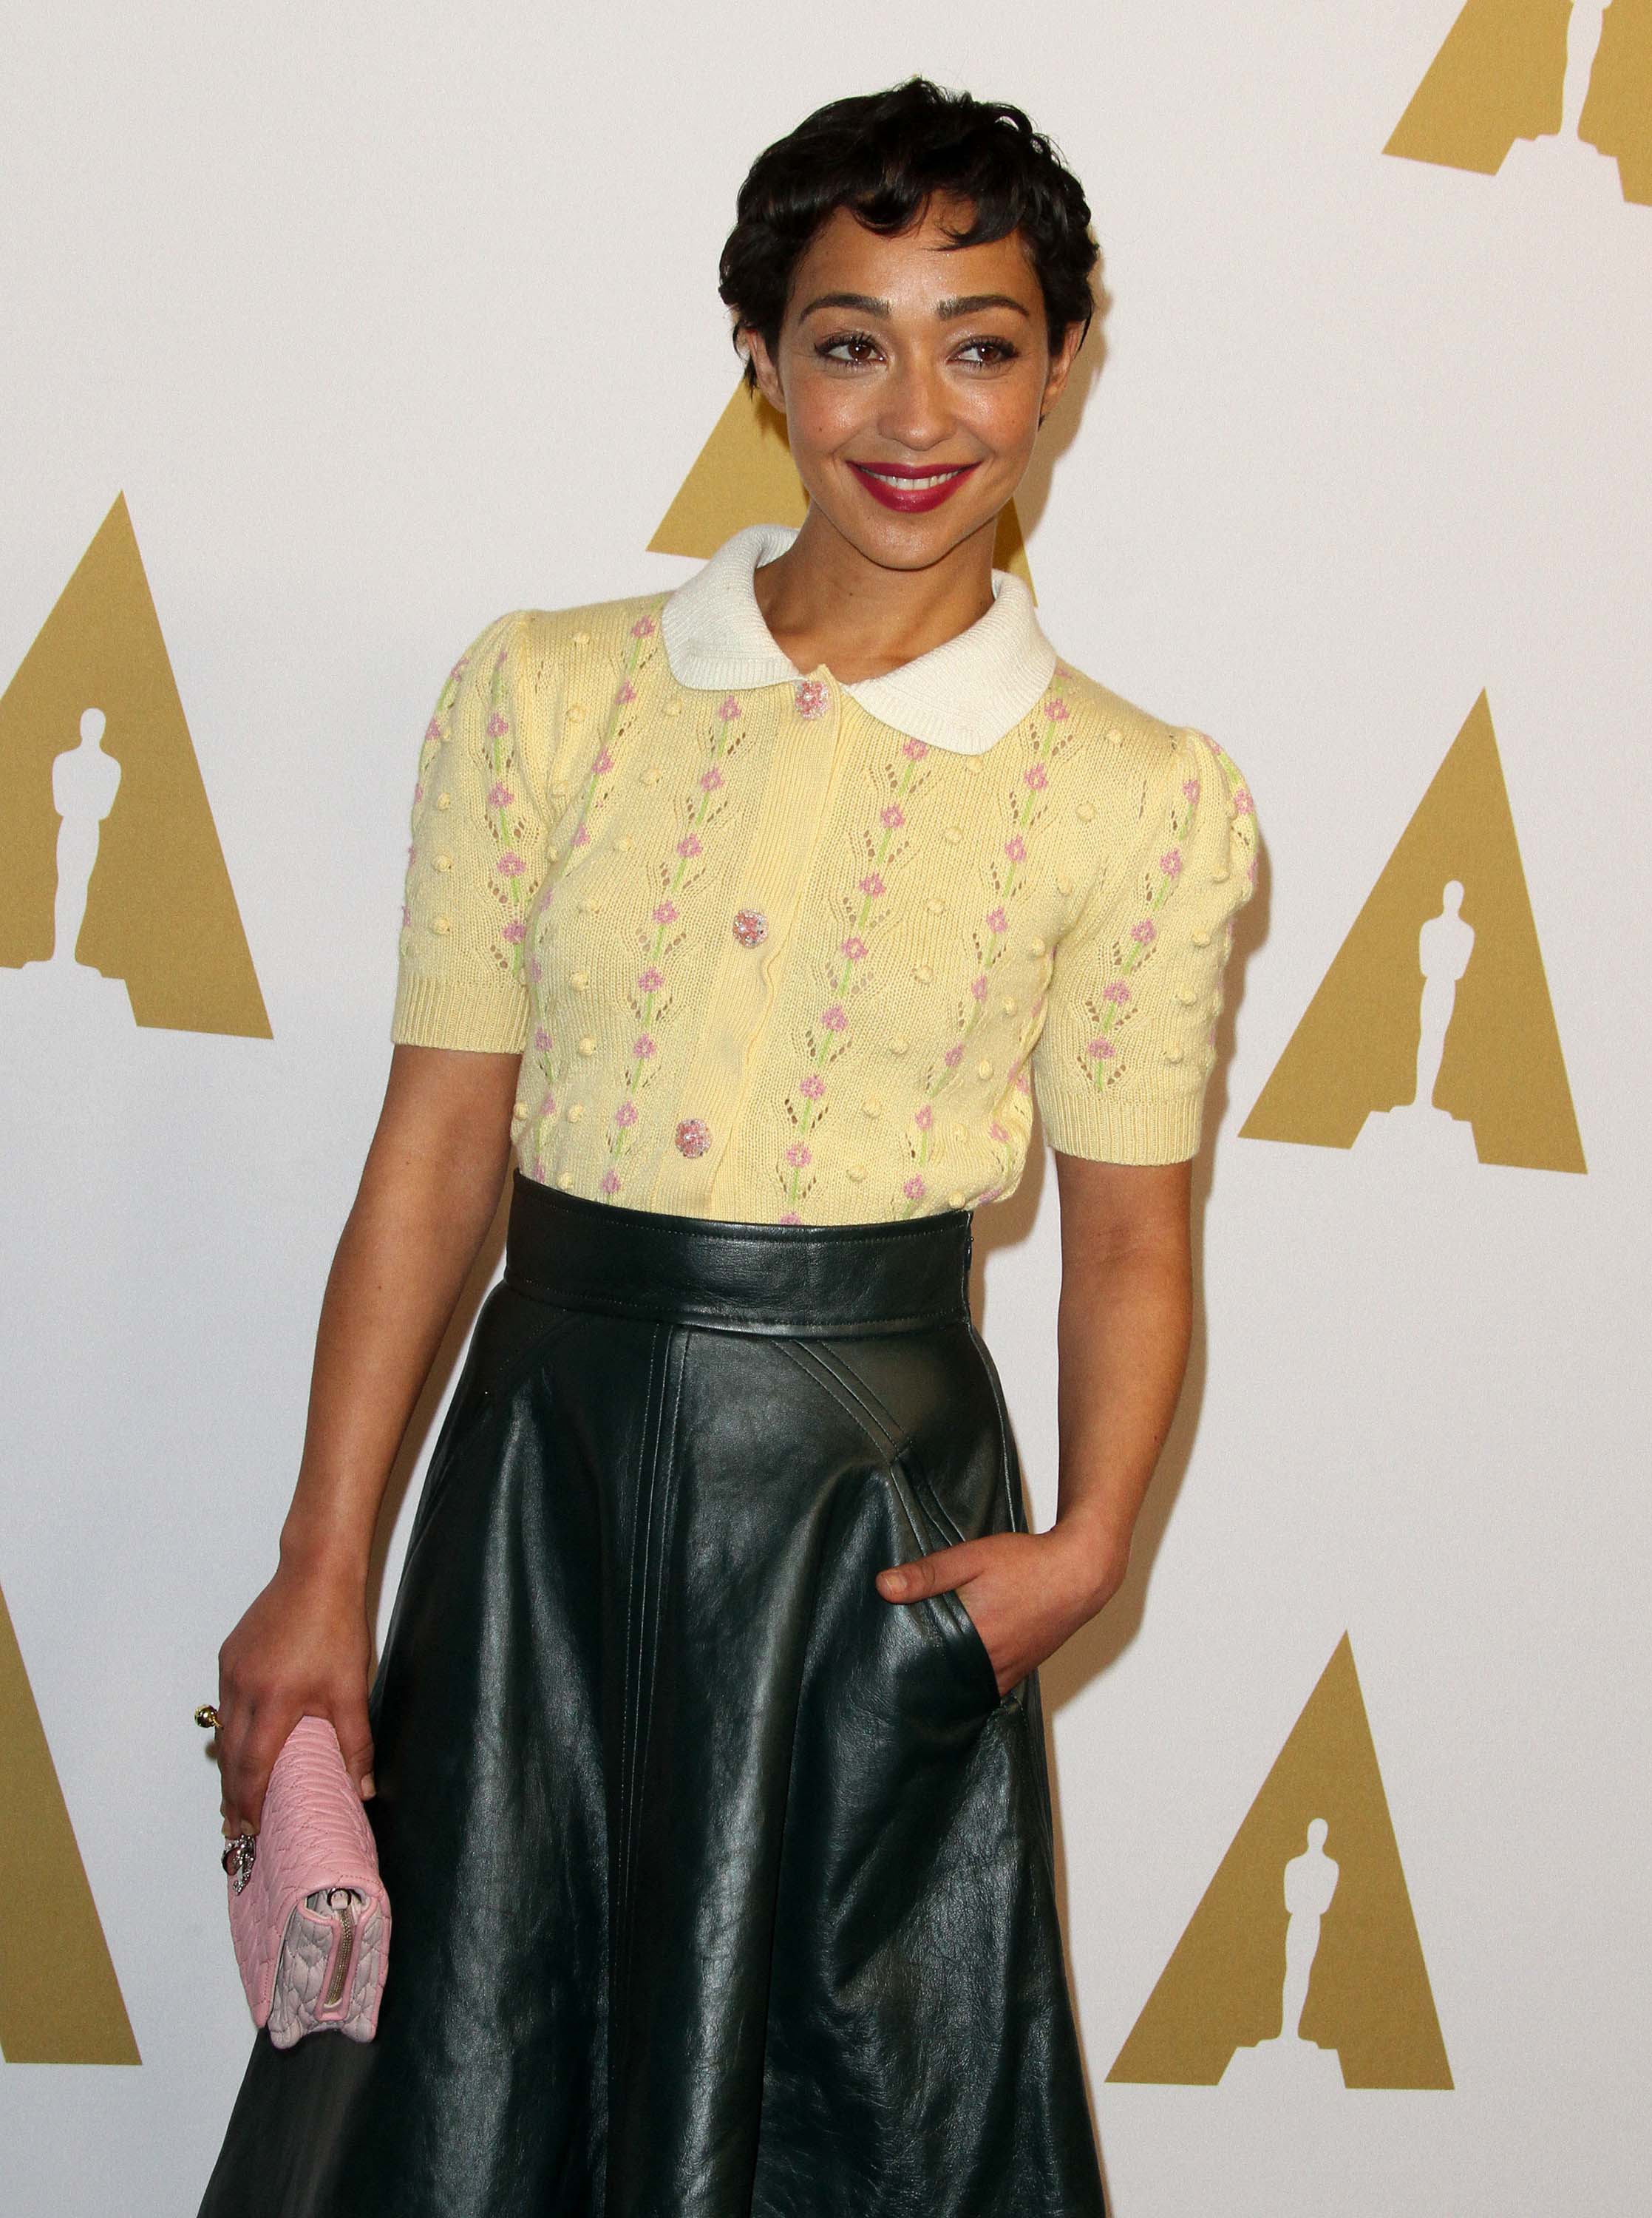 Ruth Negga attends 89th Annual Academy Awards Nominee Luncheon